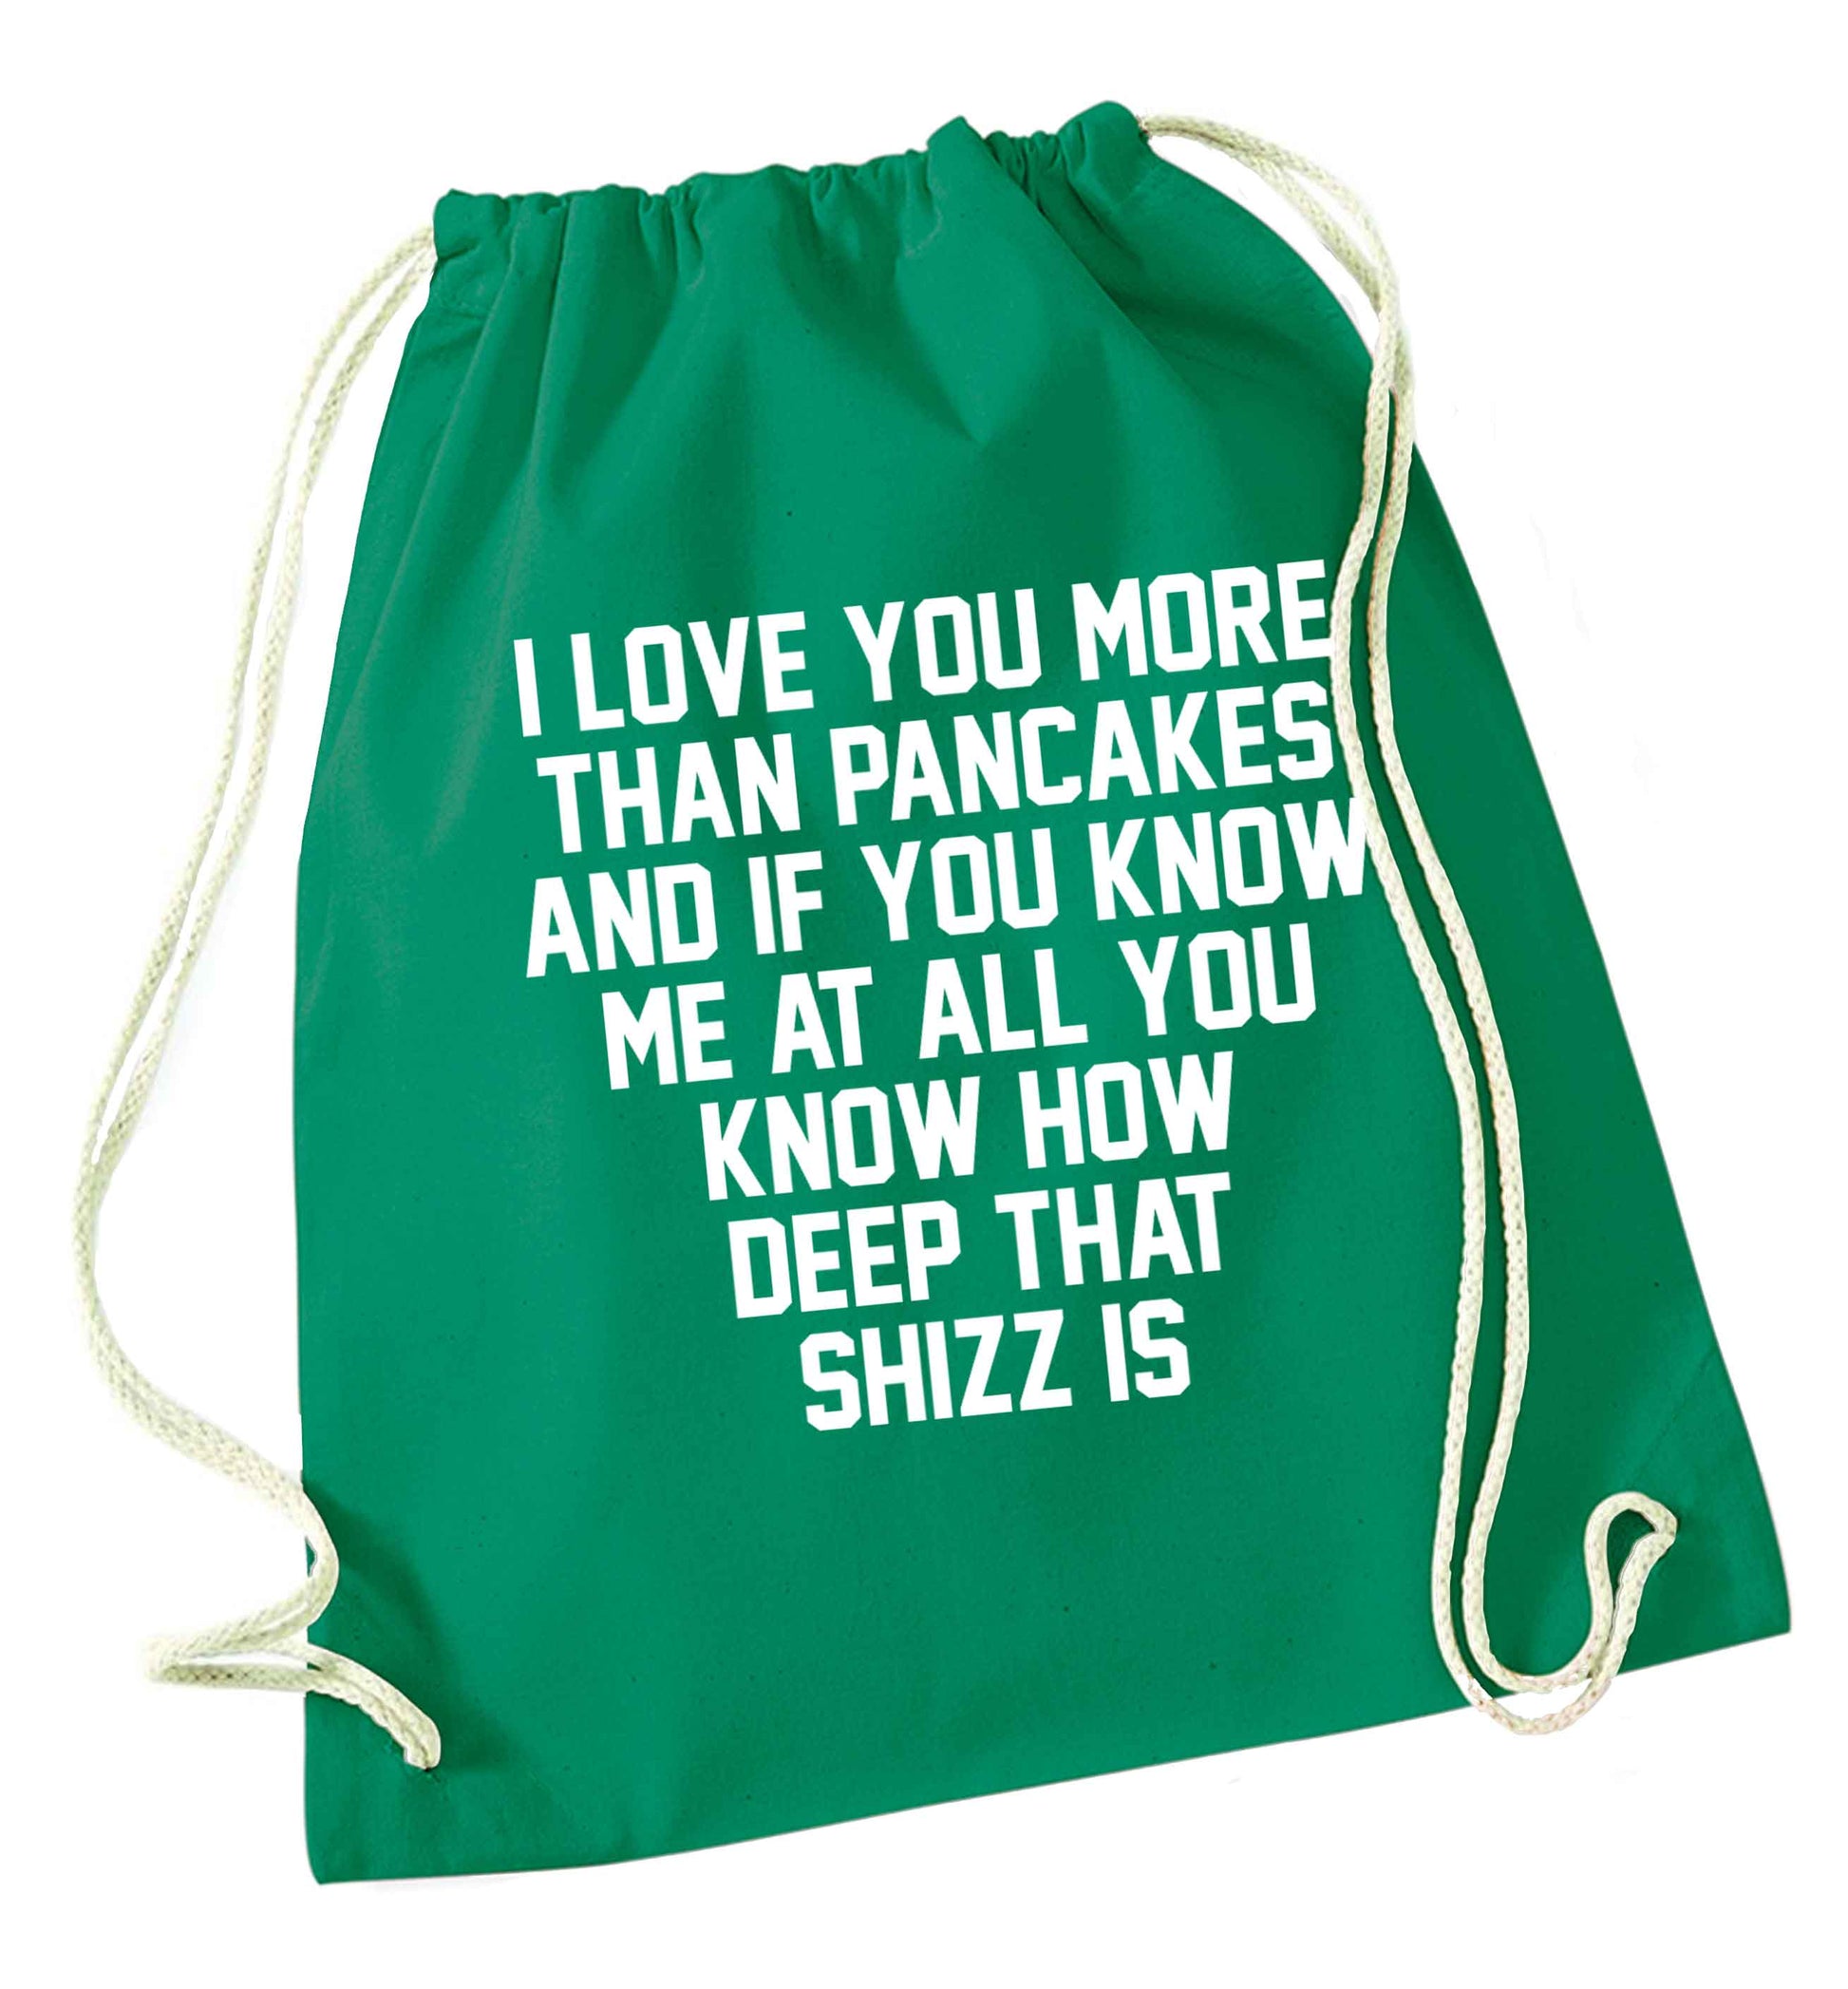 I love you more than pancakes and if you know me at all you know how deep that shizz is green drawstring bag